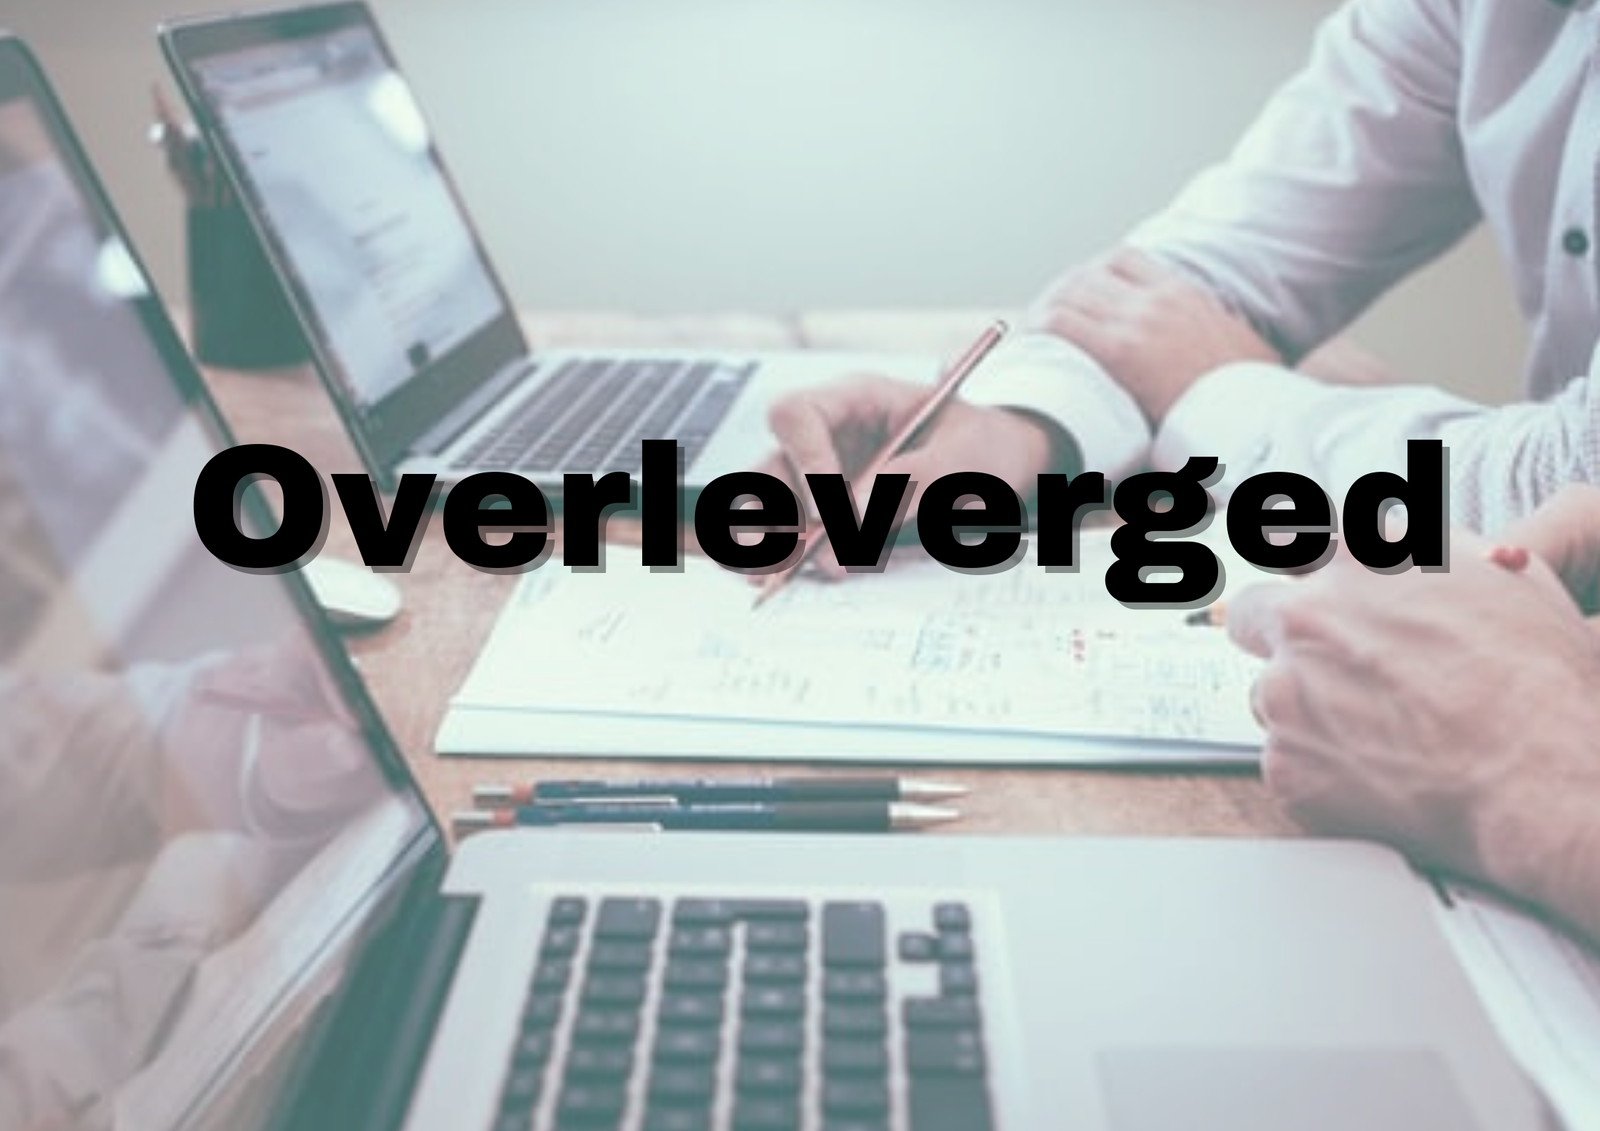 Overleveraged and its effect on finance